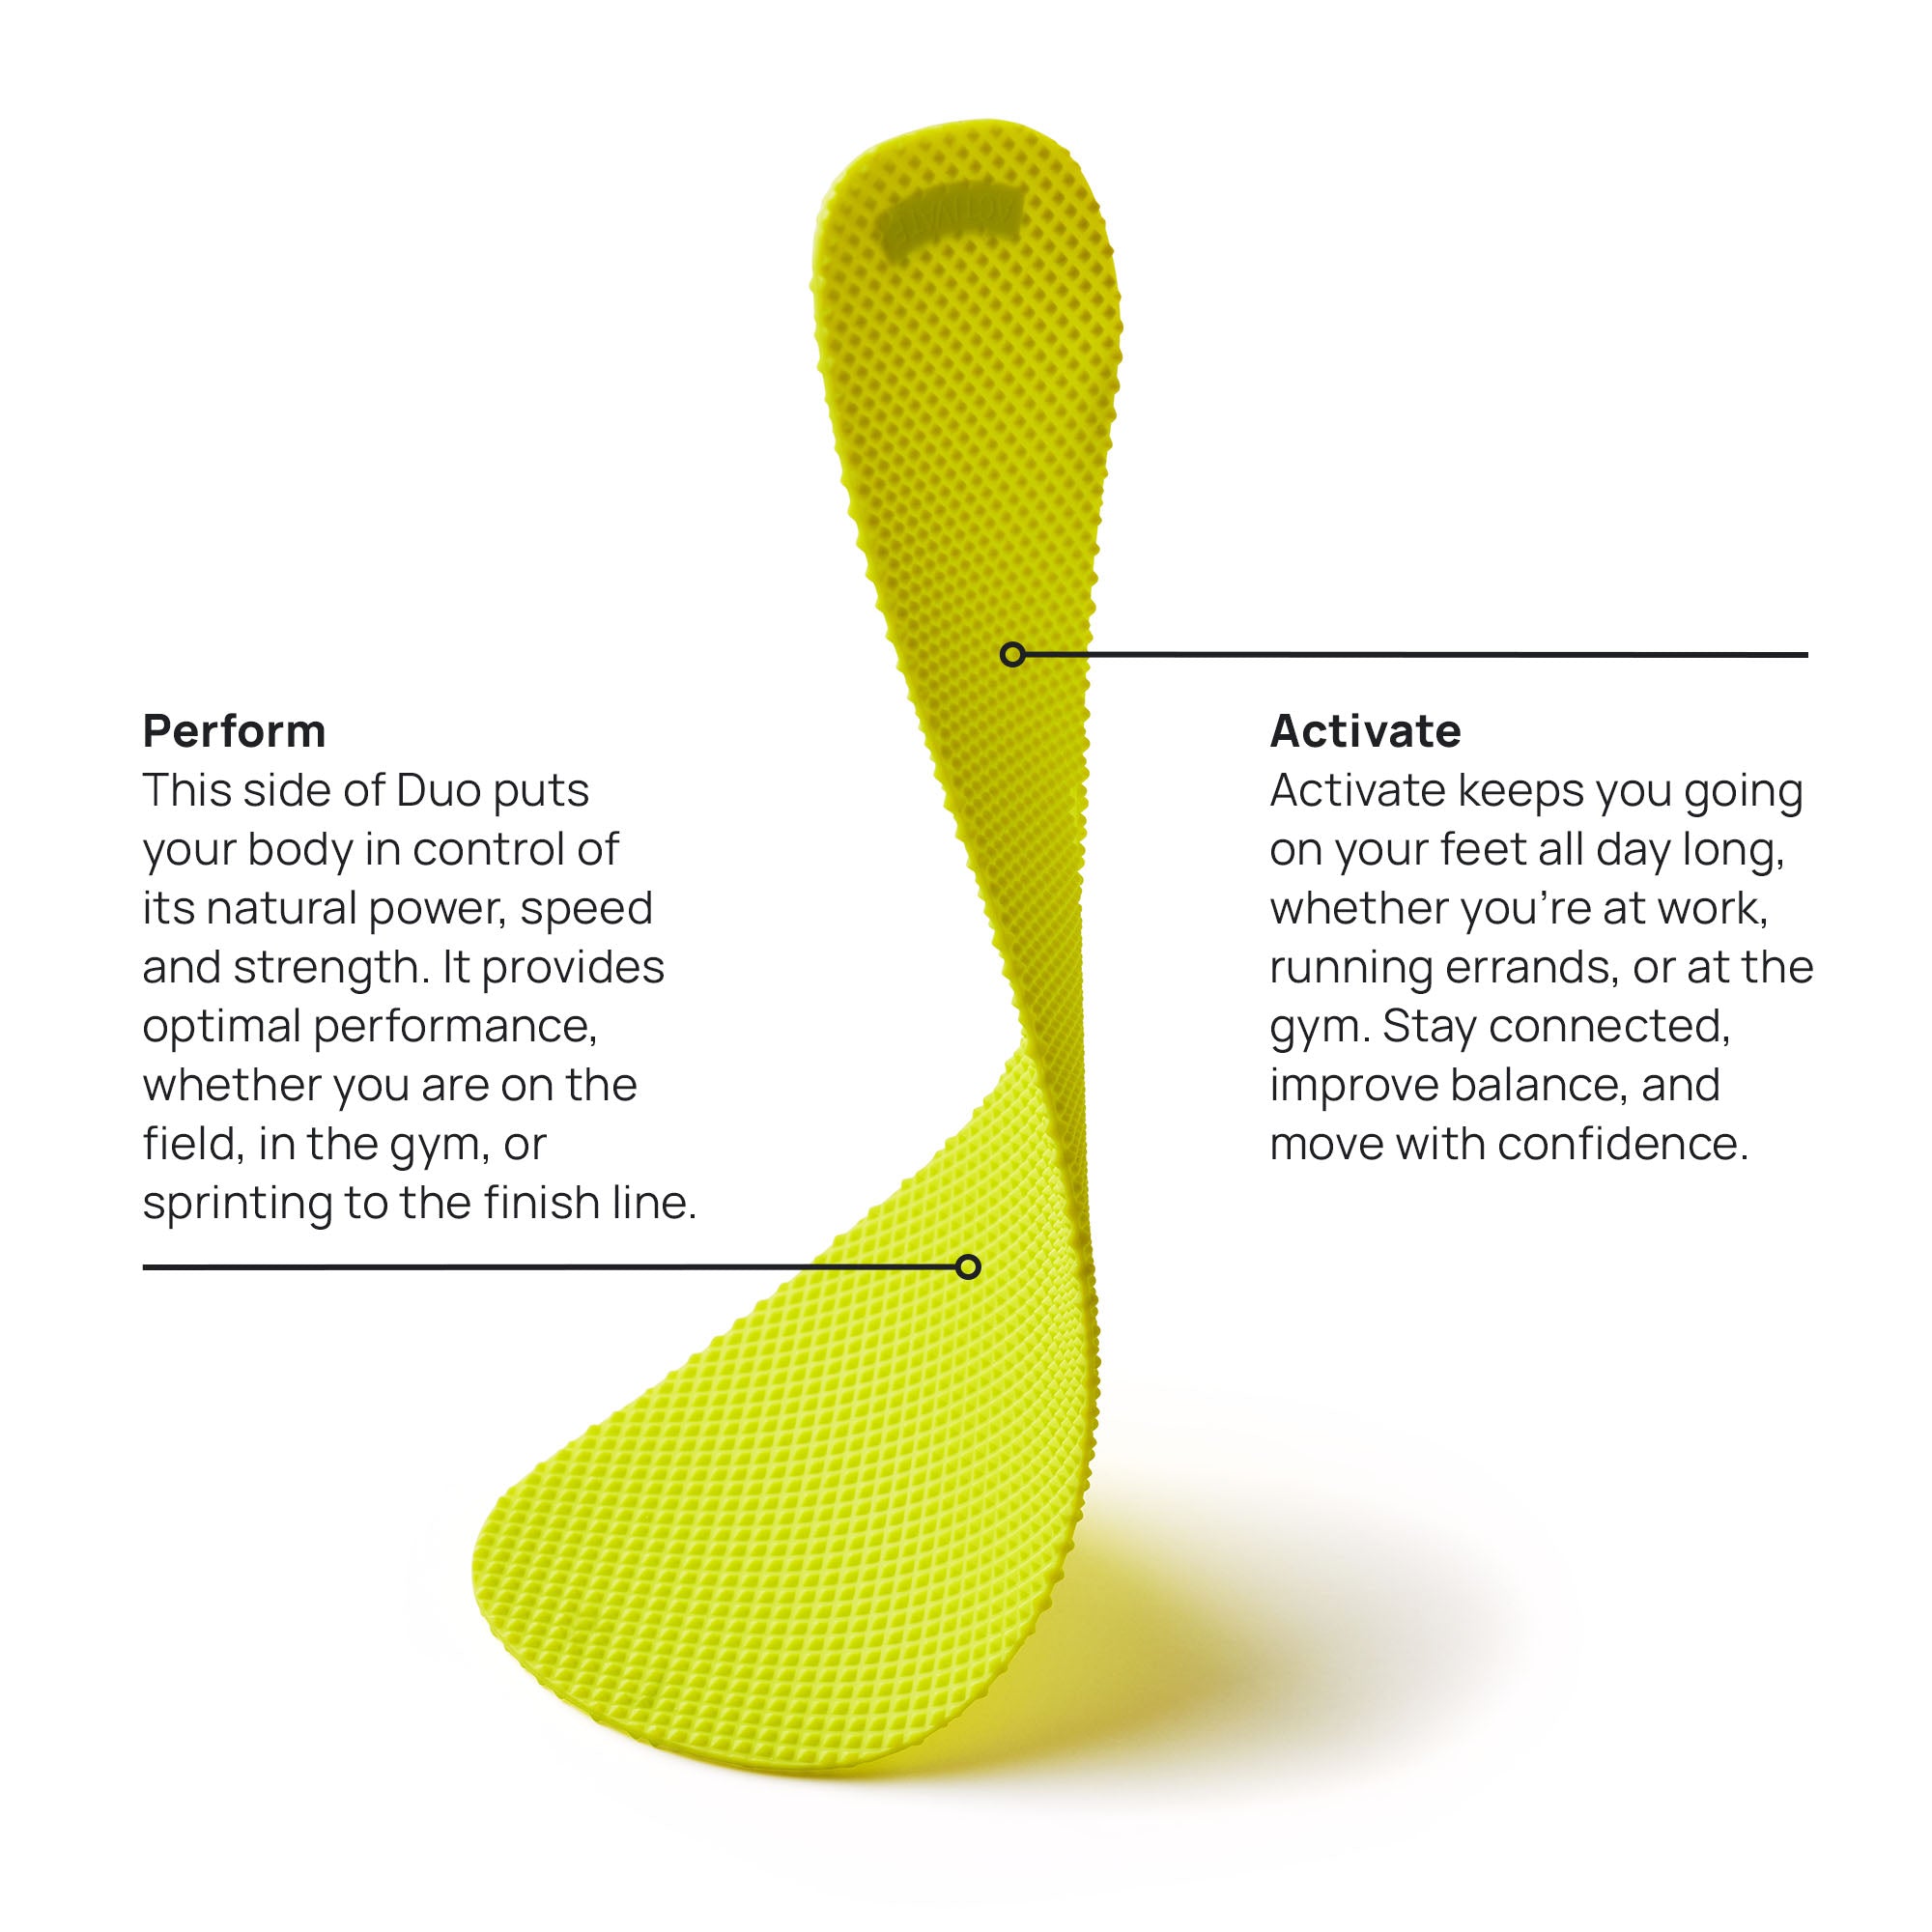 Photo of the Duo Insole along with some text showing how the texture of the insoles helps to give you energy and perform throughout the work day